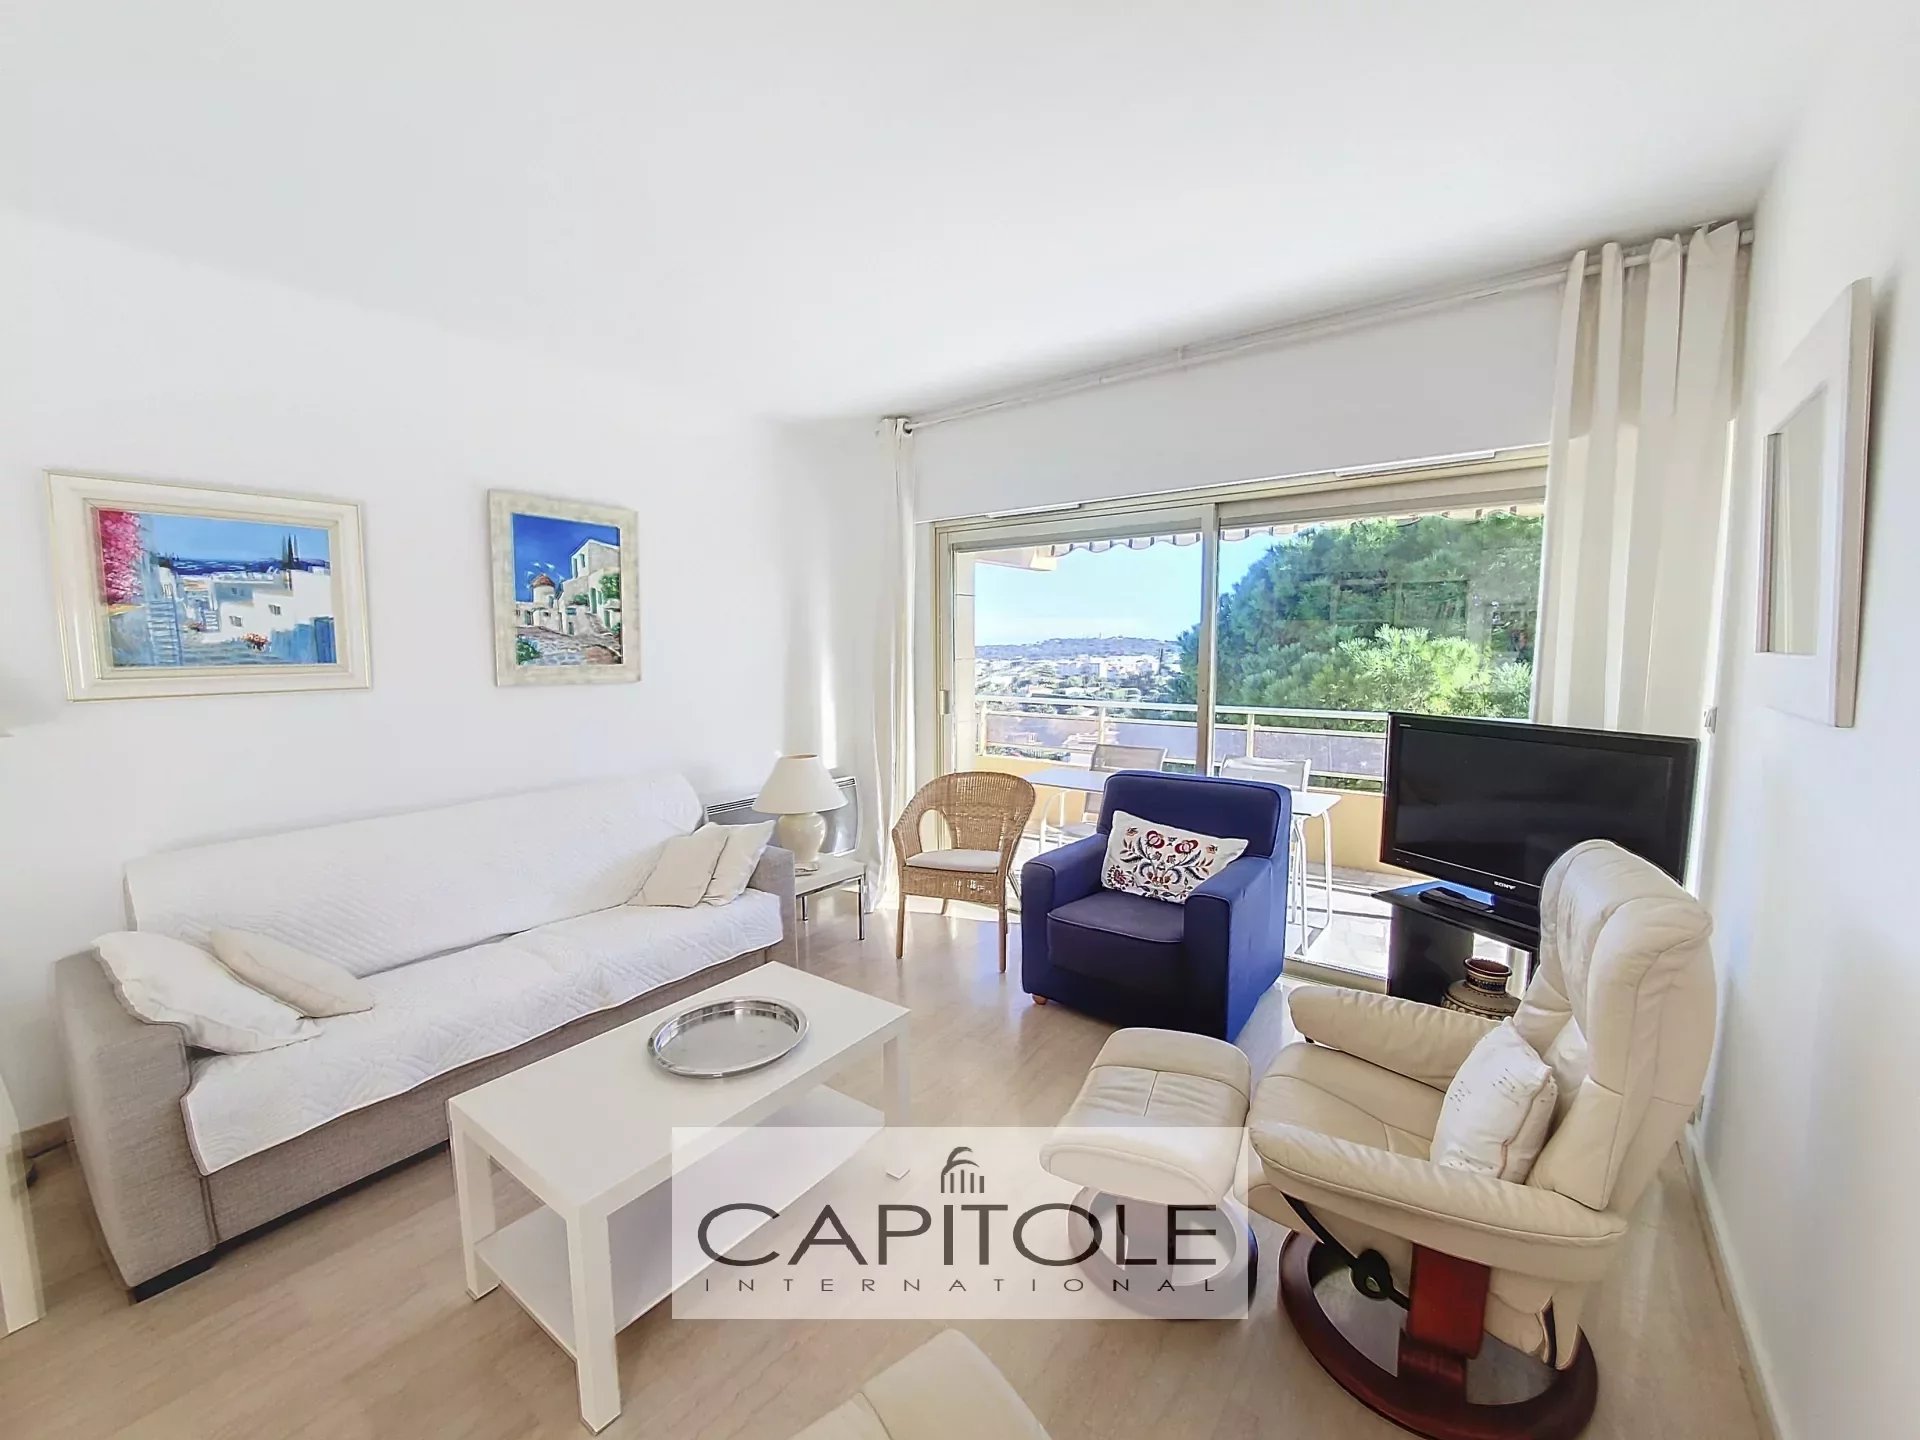 Antibes - Sole agent property : panoramic sea view, 2-bedroom corner apartement with large terrace